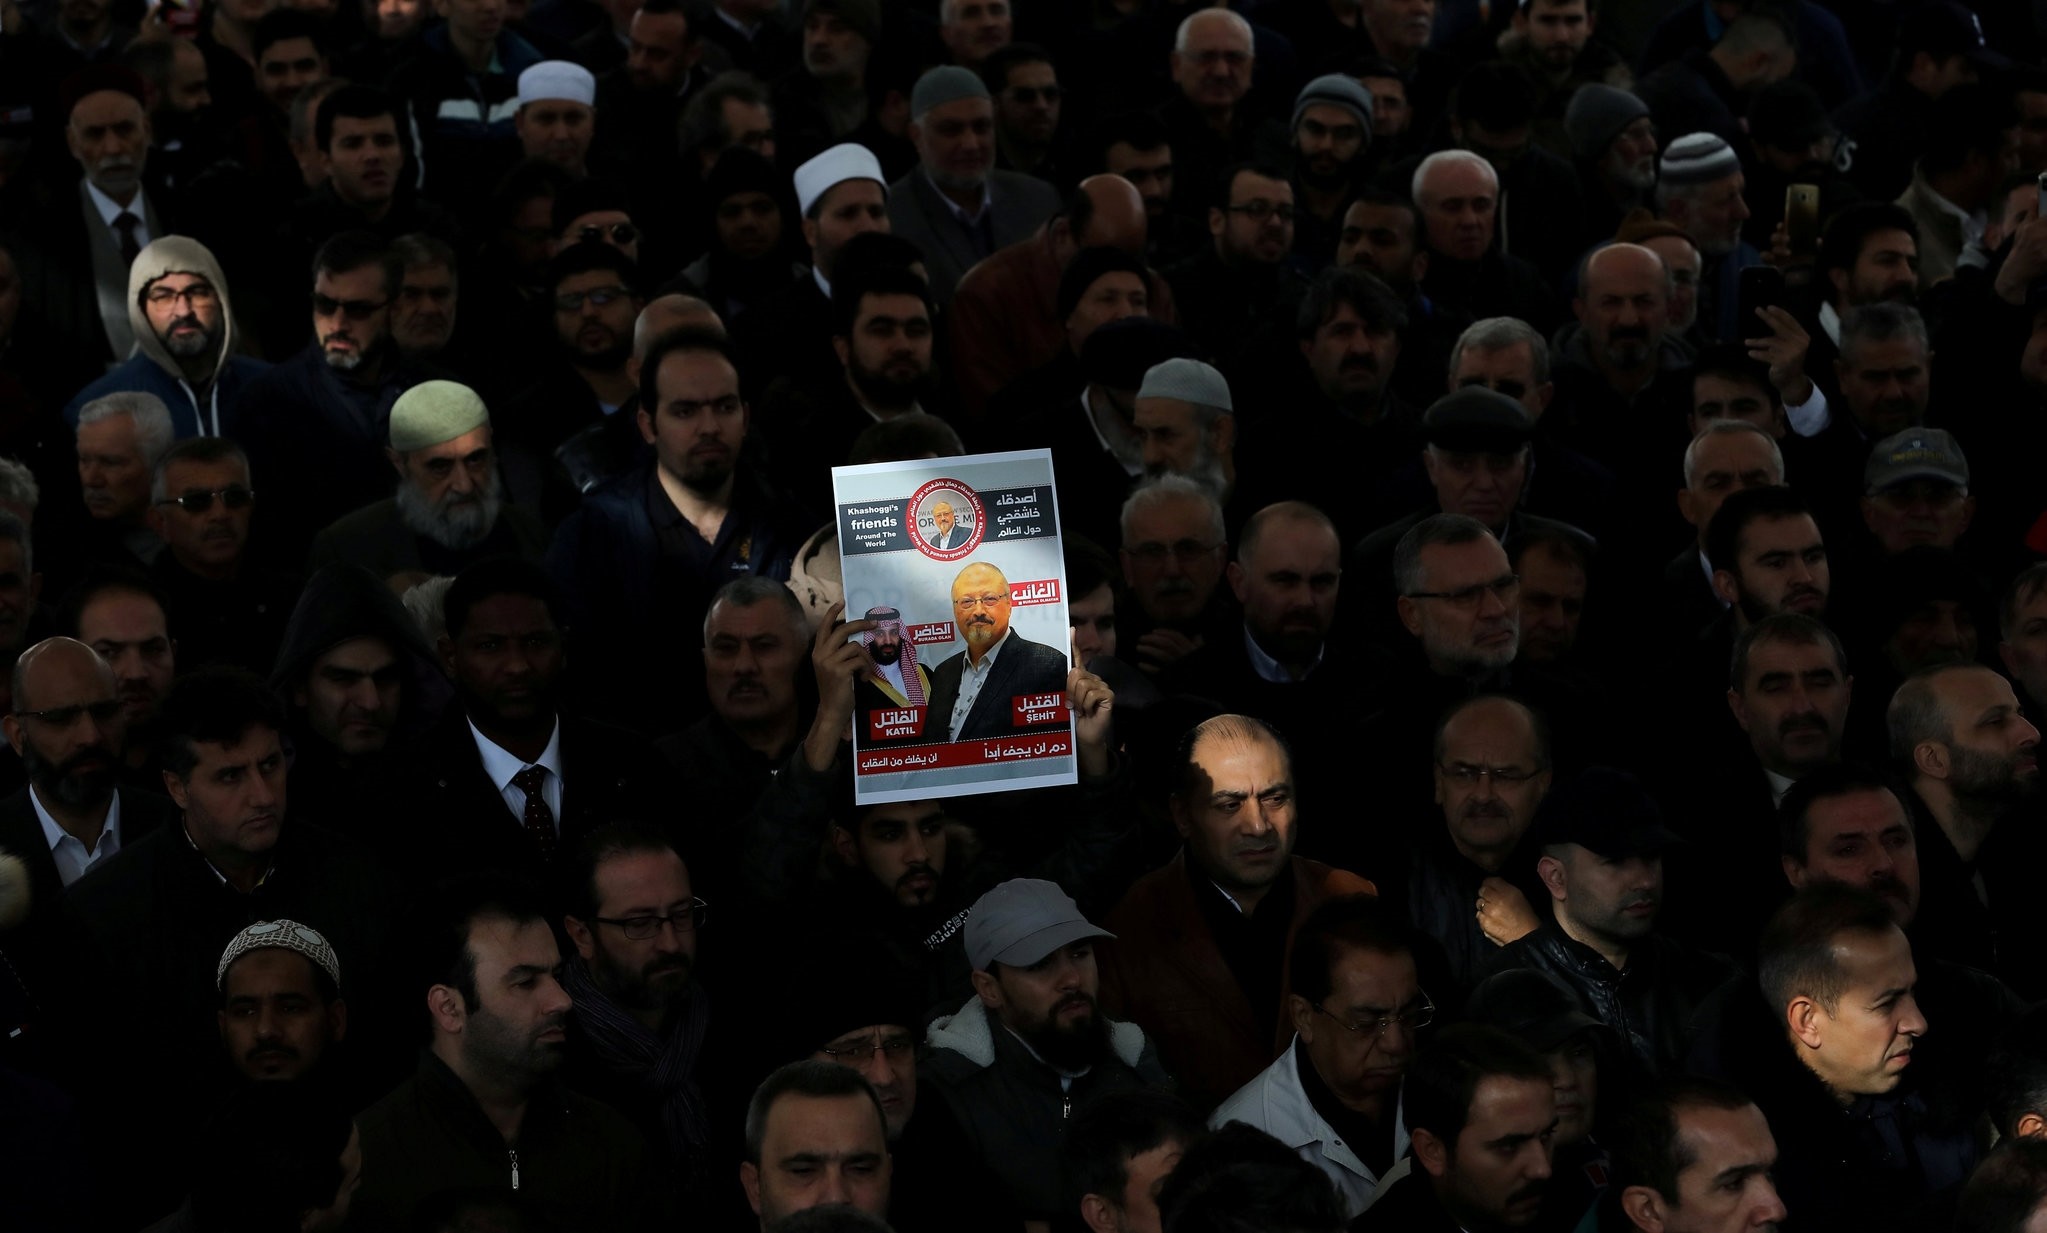 People attend a symbolic funeral prayer for Saudi journalist Jamal Khashoggi in the courtyard of Fatih Mosque in Istanbul, Nov. 16.